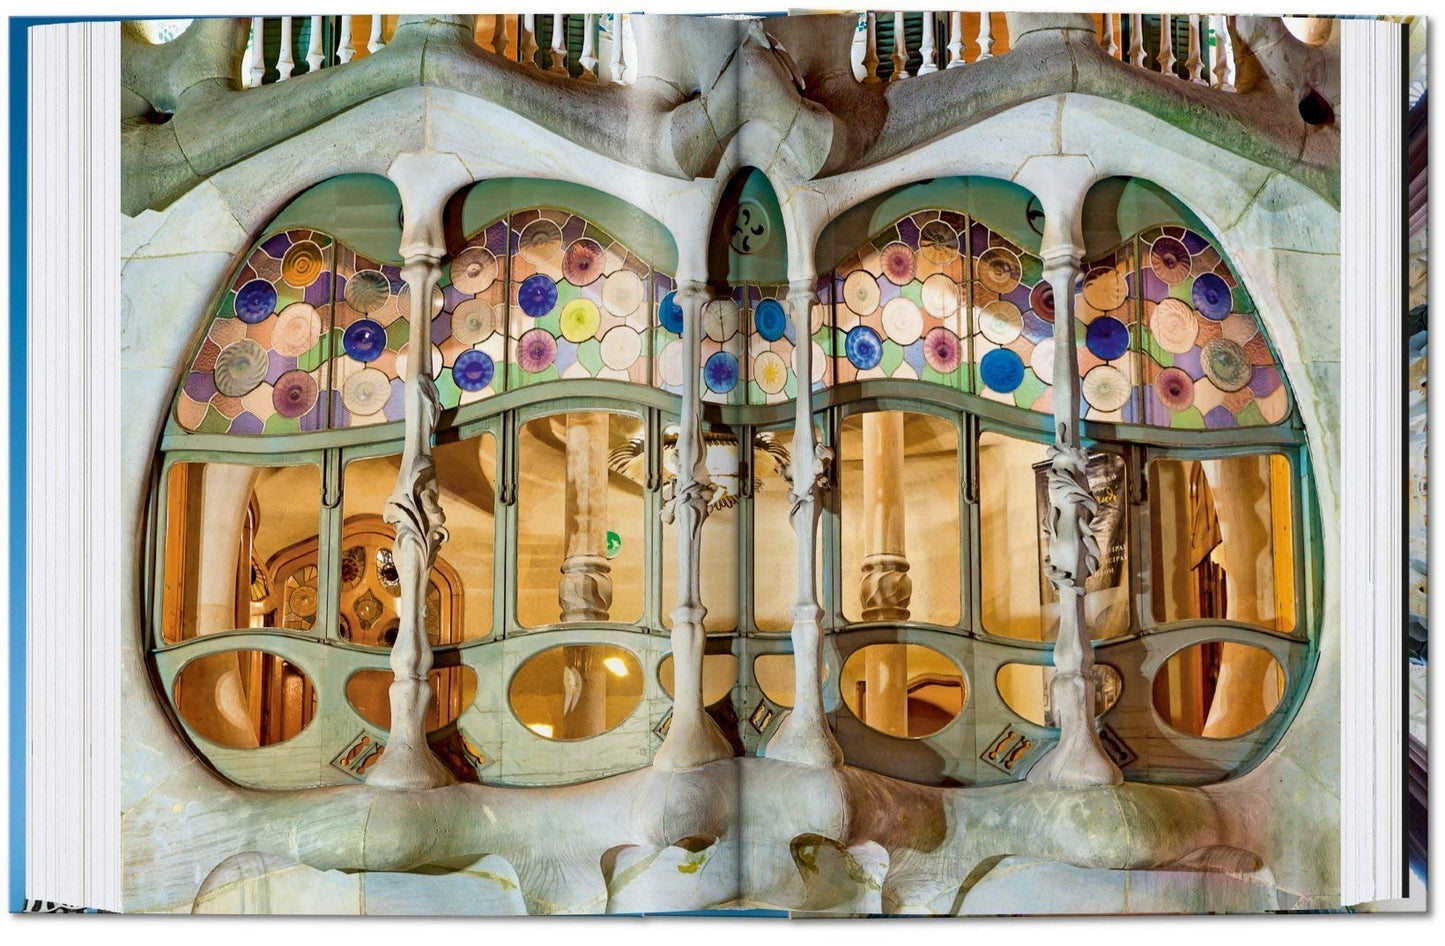 40 Gaudí: The Complete Works - Rainer Zerbst